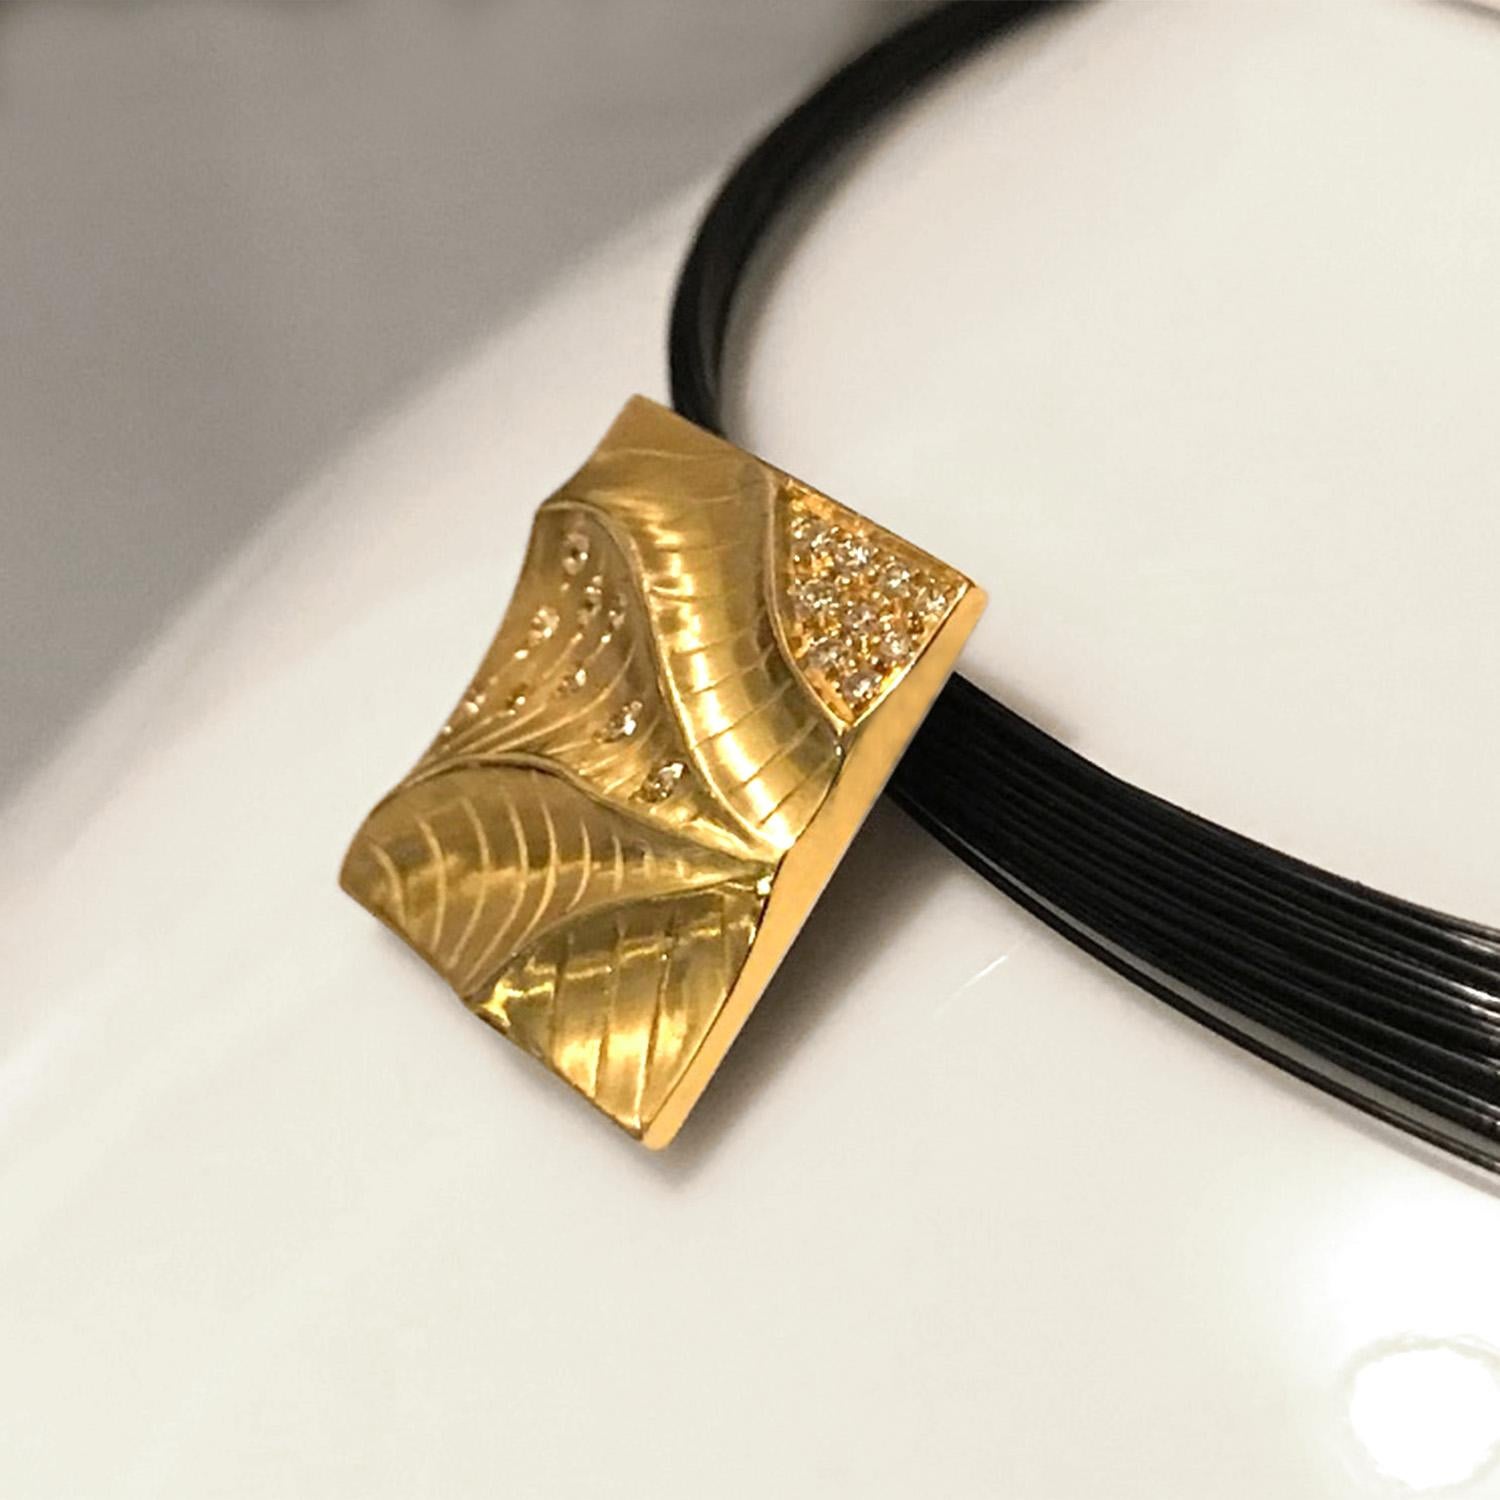 The aptly named Square Pendant (19.5 x 19.5mm) is a beautiful example of what Keiko Mita is trying to accomplish with her Sand Dune Collection . Made from 18k Yellow Gold and 0.21ct Diamonds, the undulating peaks and valleys show the terrain just